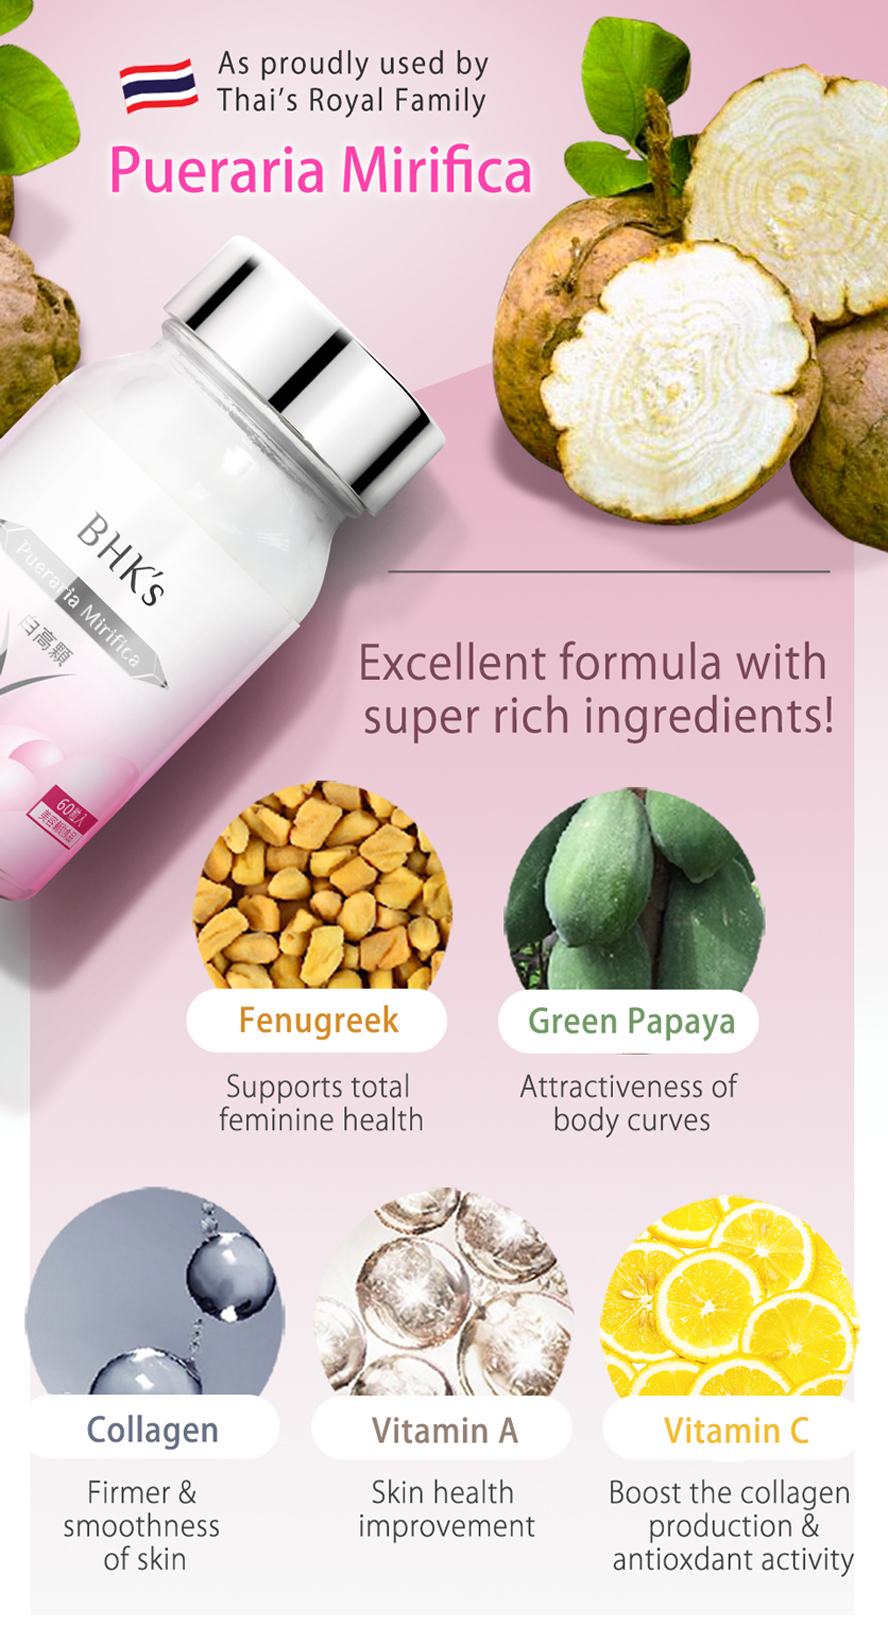 BHK's Pueraria Mirifica firms up and stimulates the growth of breast tissues just as a second youth